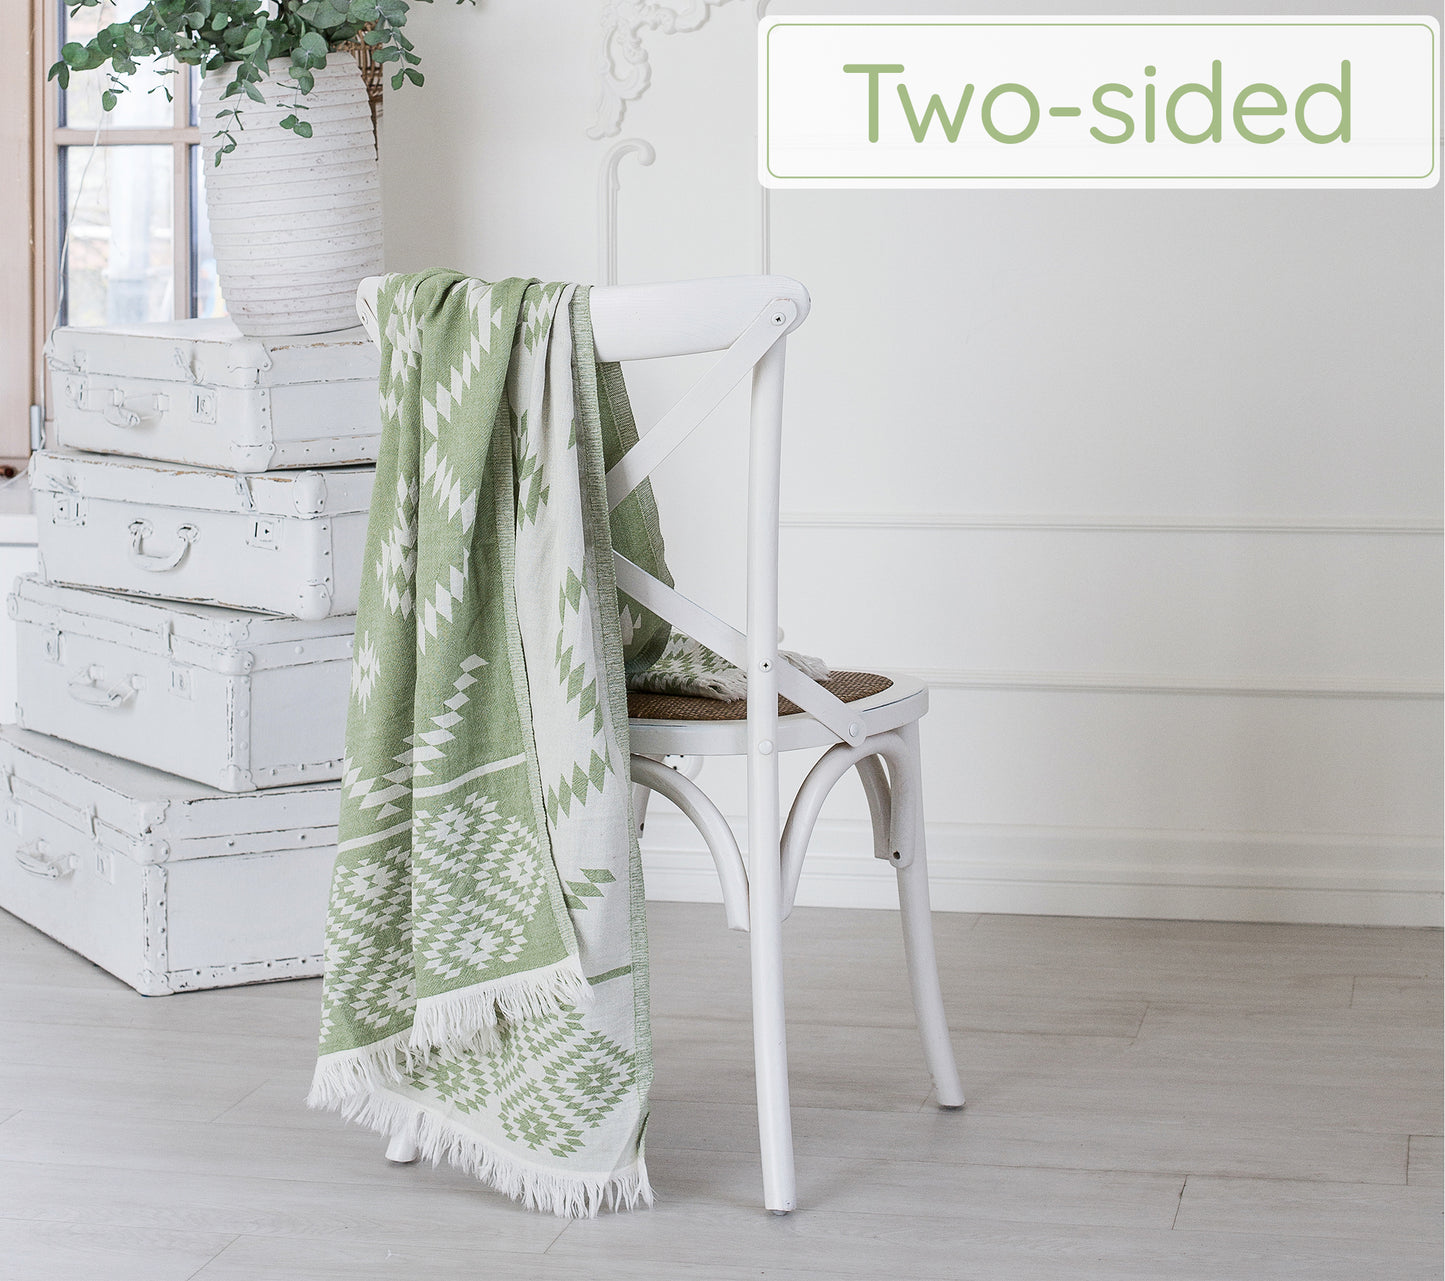 Soft Green Turkish Beach Towel (35”x67”)  Lightweight, Quick drying and Sand Free Can be Used as Beach Blanket 100% Cotton Vintage Design